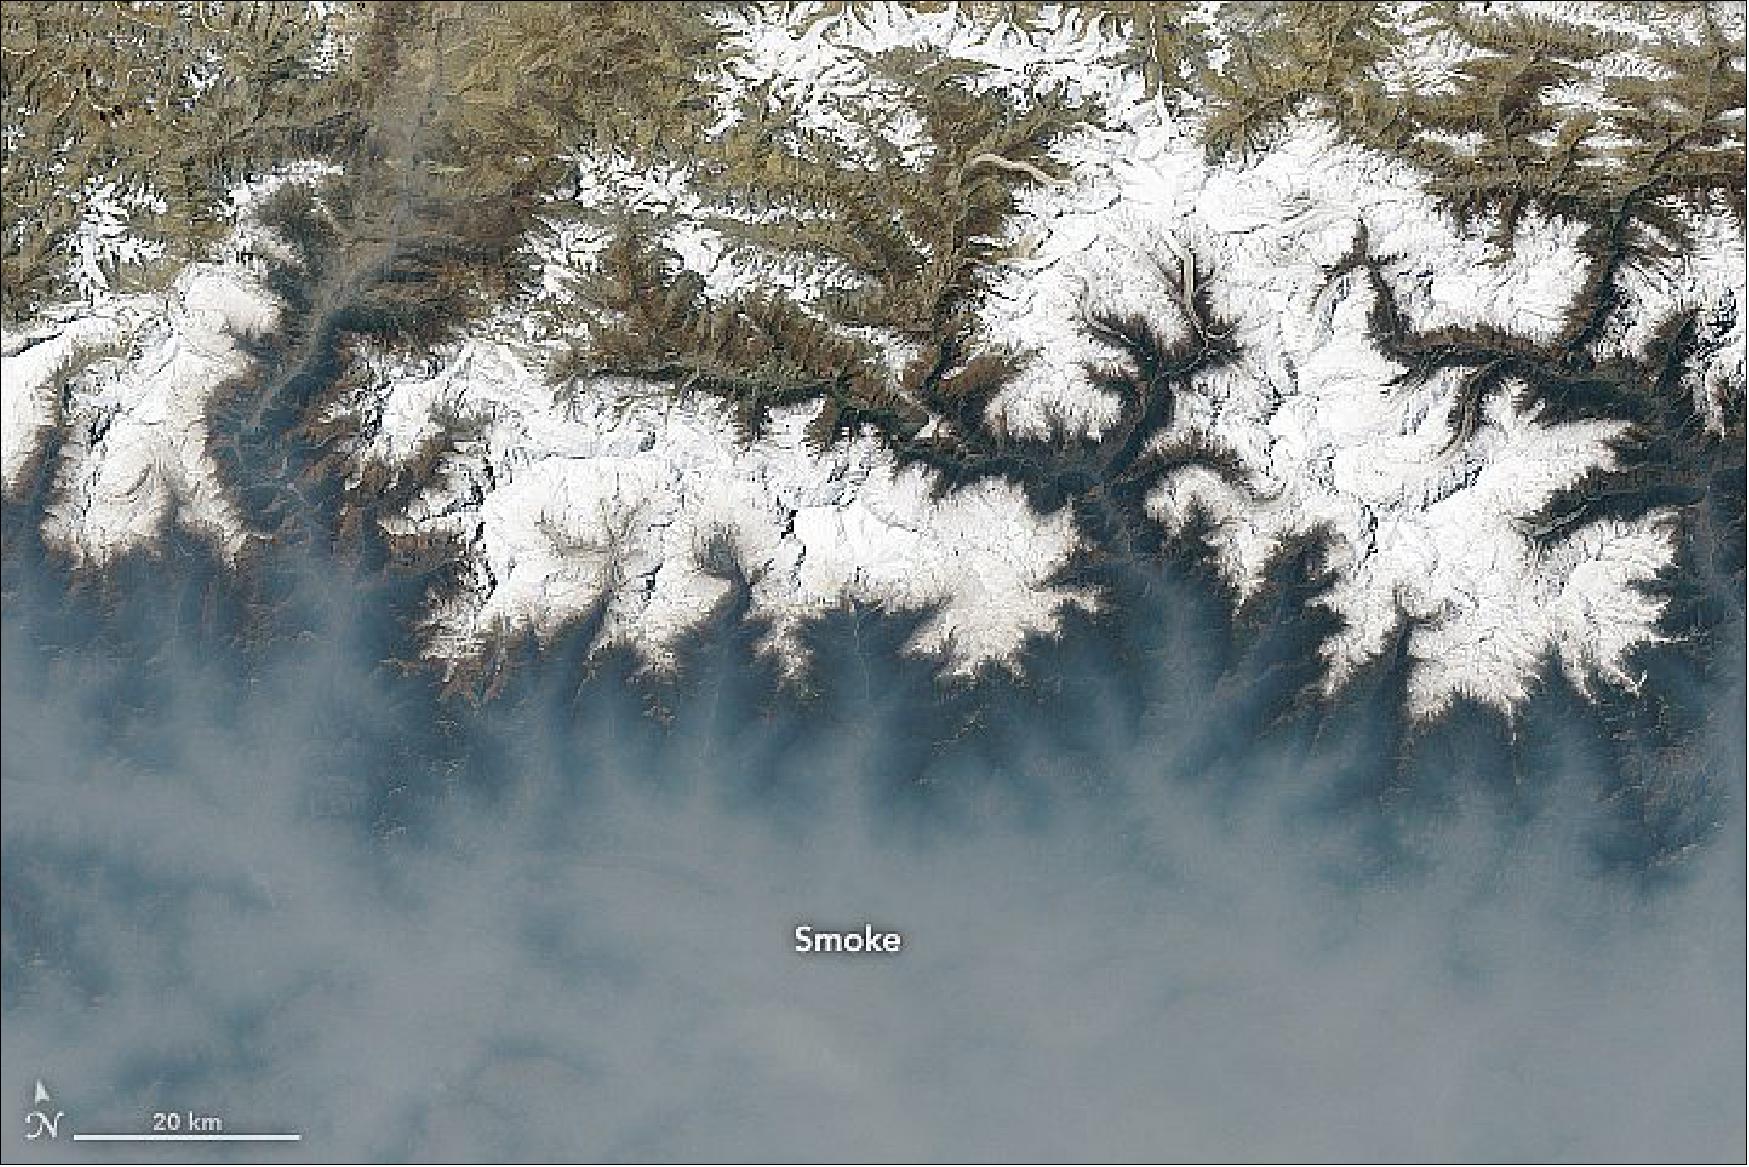 Figure 42: The Operational Land Imager (OLI) on Landsat-8 offered a more detailed view of a smoke pall covering the foothills and valleys near Pokhara on the same day (image credit: NASA Earth Observatory)